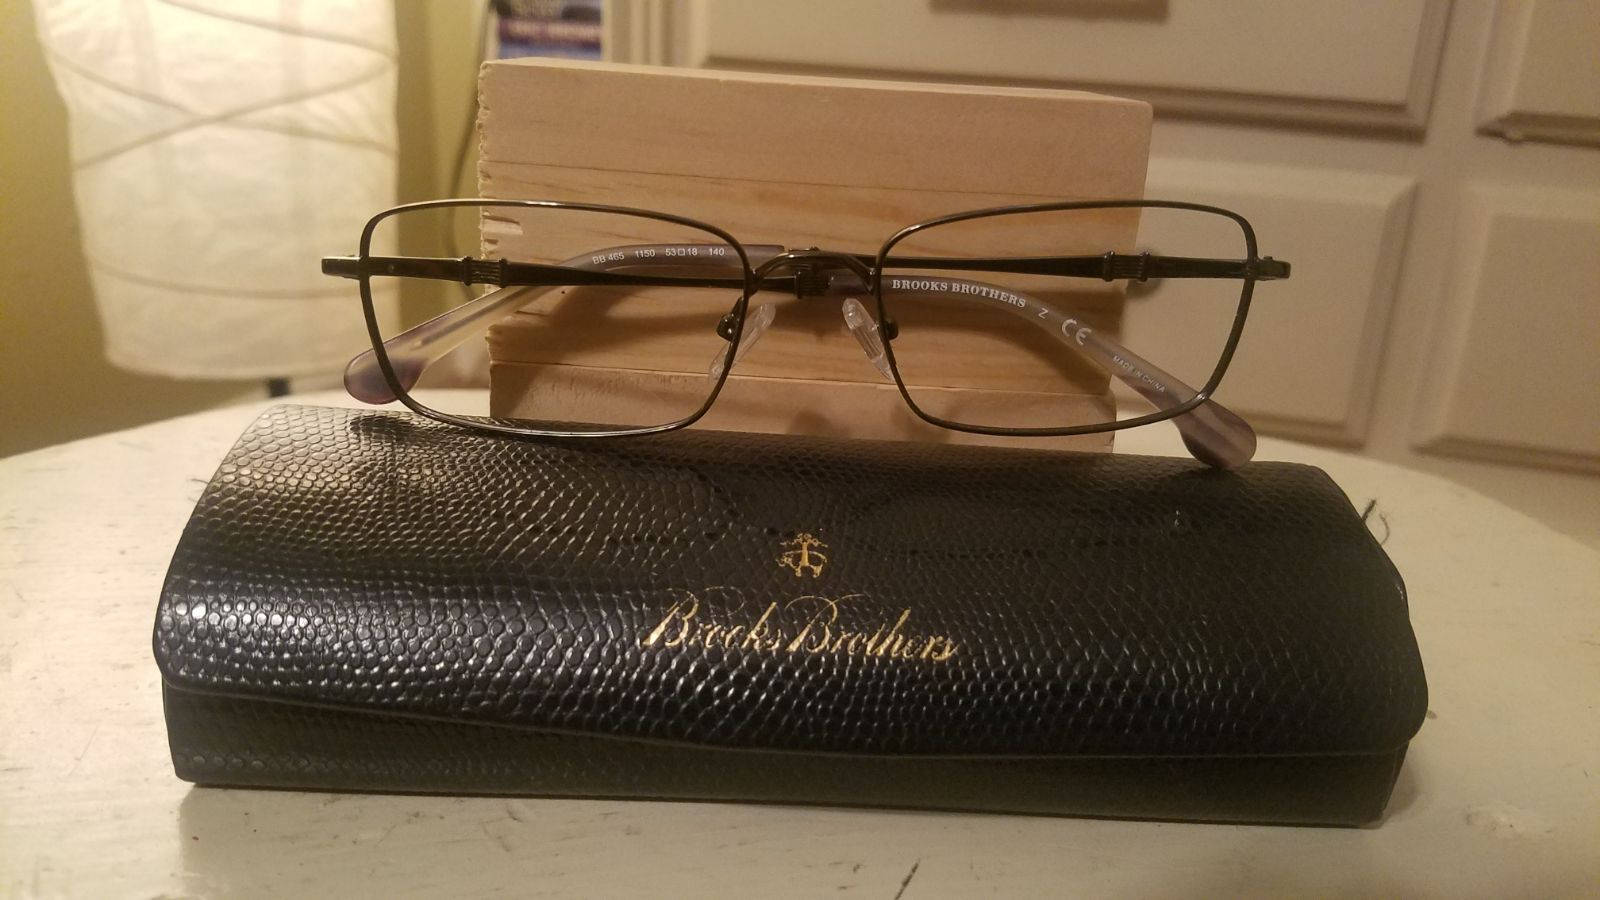 Brooks Brothers Eyeglasses With Case Wallpaper